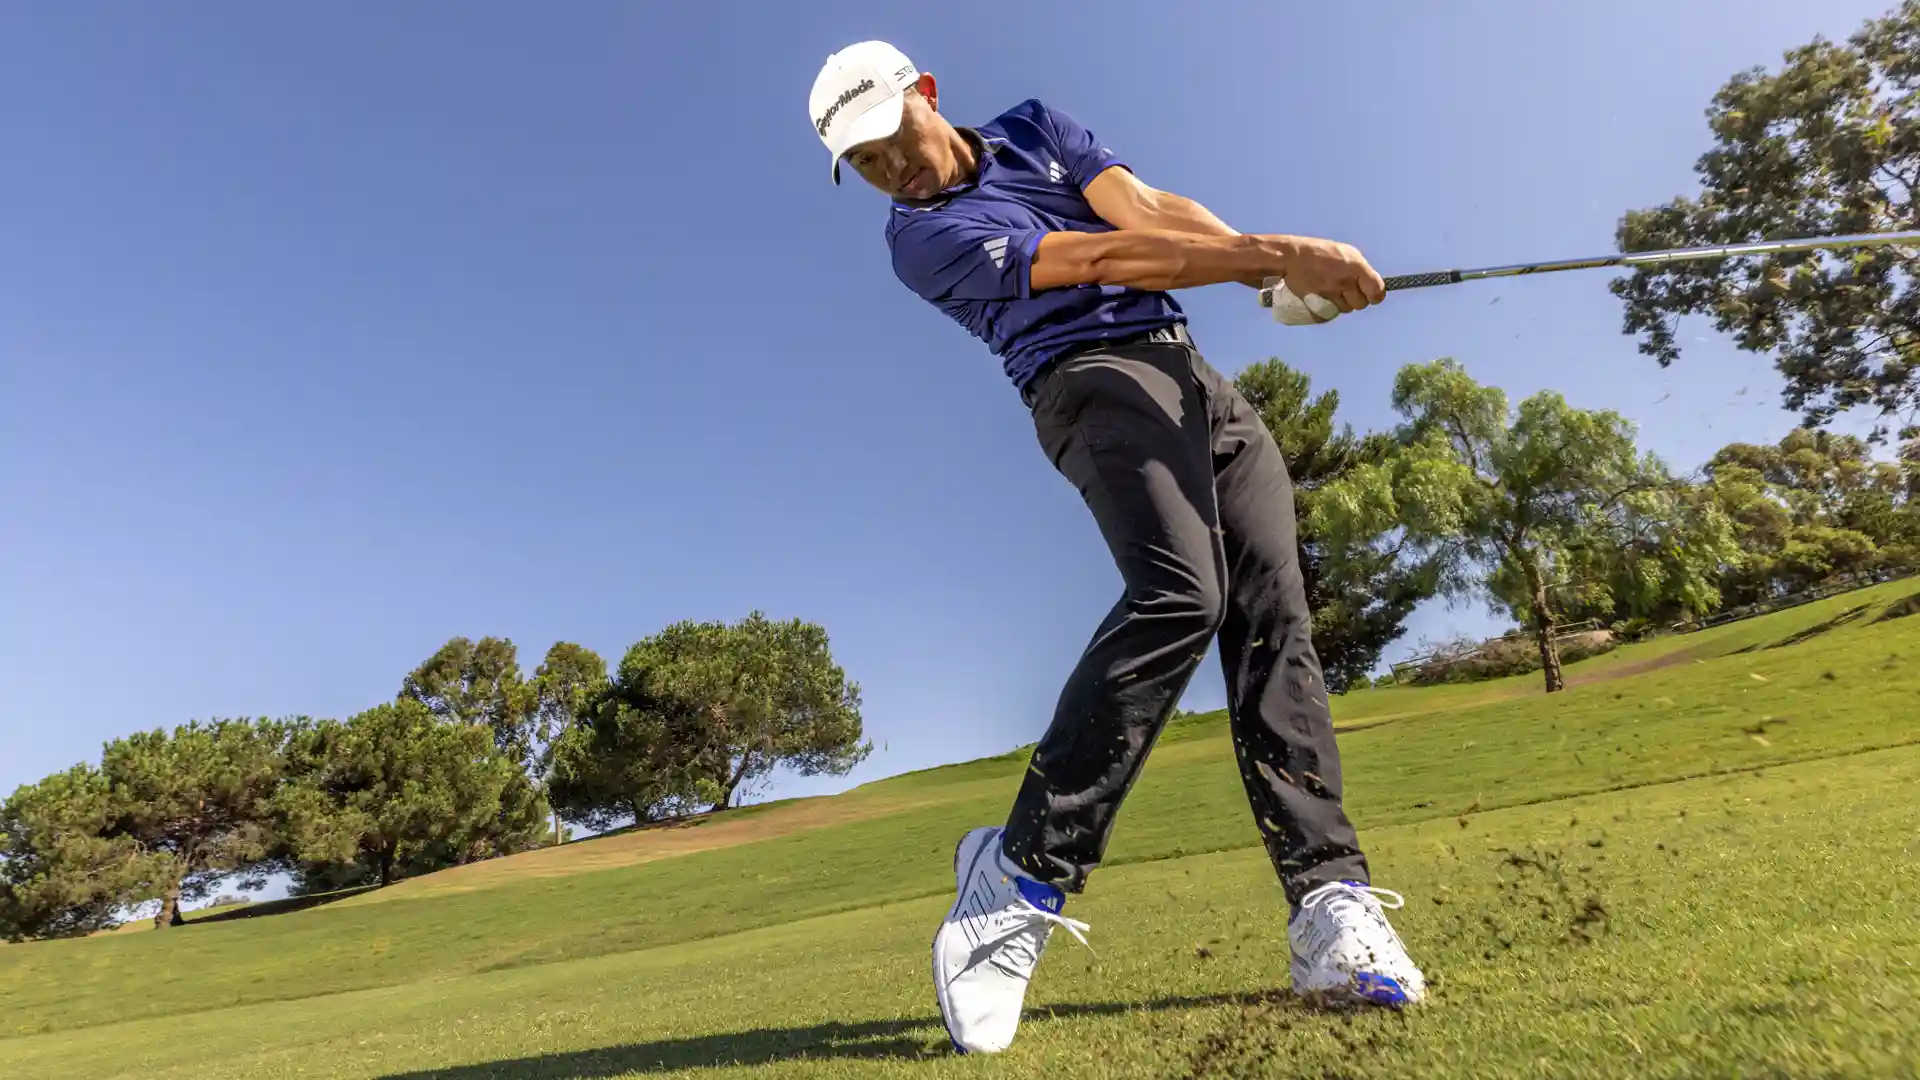 ADIDAS STRENGTHENS PERFORMANCE RANGE WITH NEW ZG23 FOOTWEAR AND ULTIMATE365 TOUR APPAREL © Copyright PLPG GLOBAL MEDIA 2023